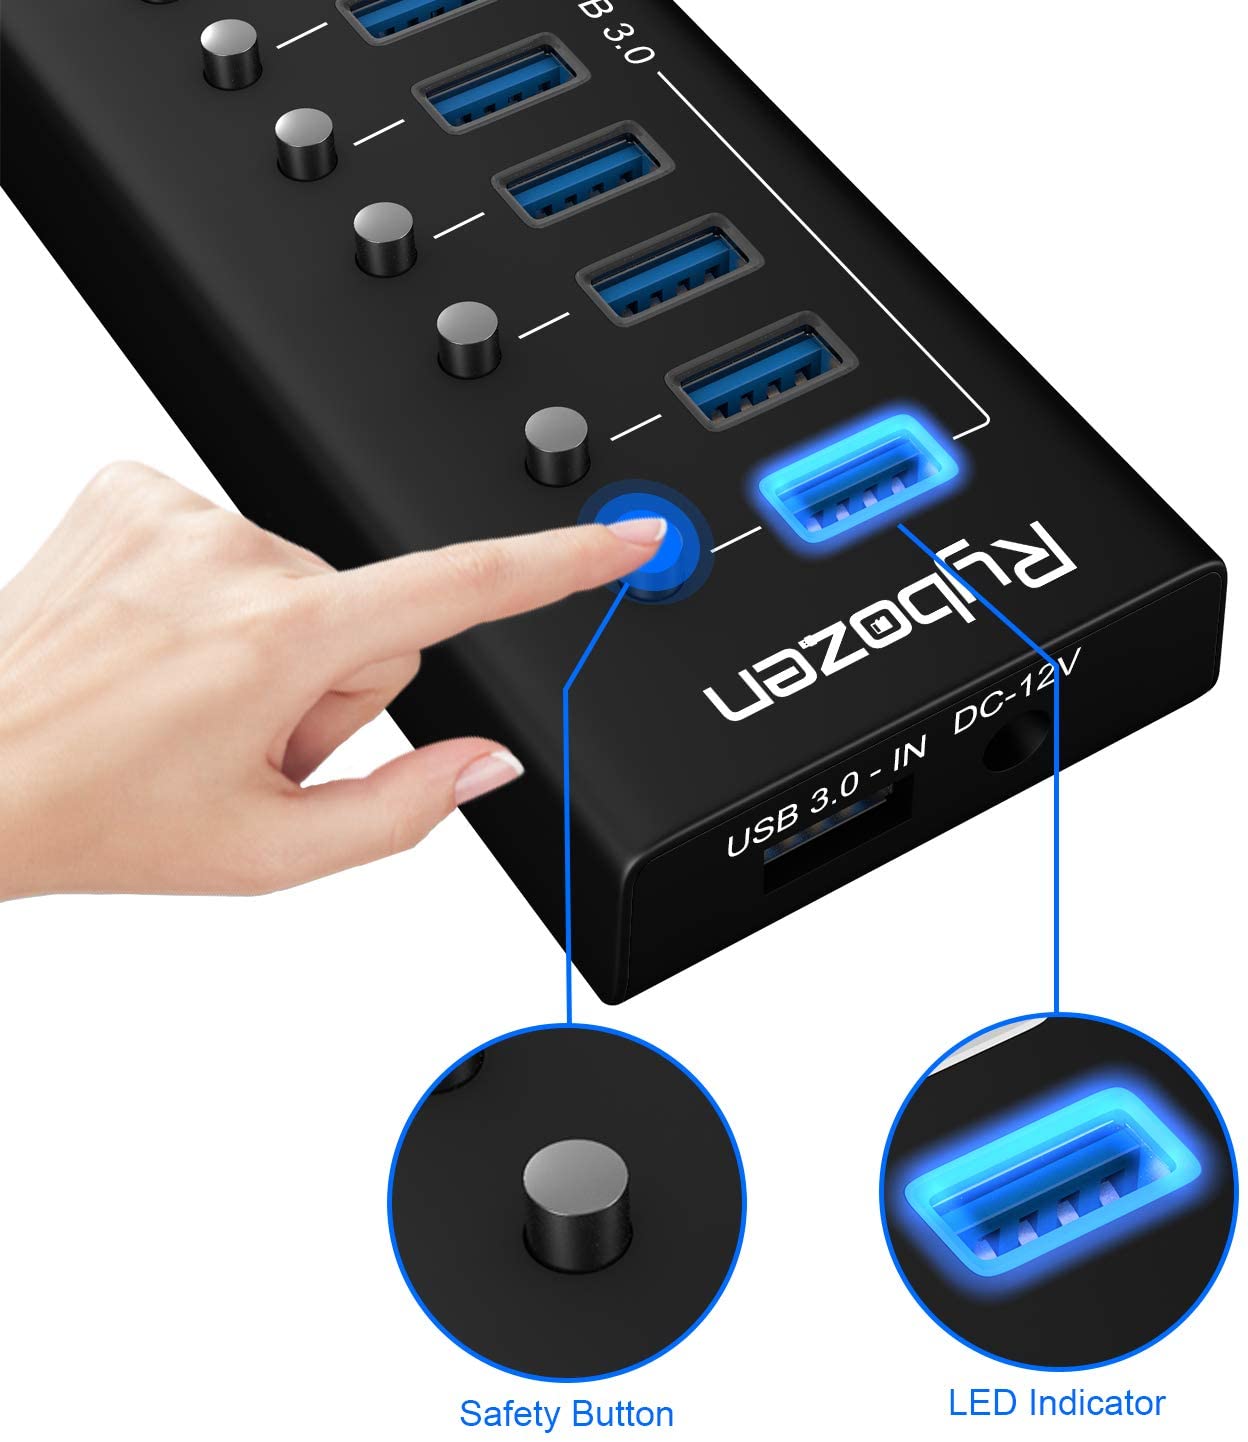 Rybozen USB Hub 3.0, 7 USB 3.0 Super Speed Data Ports and 3 USB Smart Charging Ports, with LEDs Individual Switches and Power Adapter for Keyboard, Mouse, Printer, Hard Drivers and More USB Devices